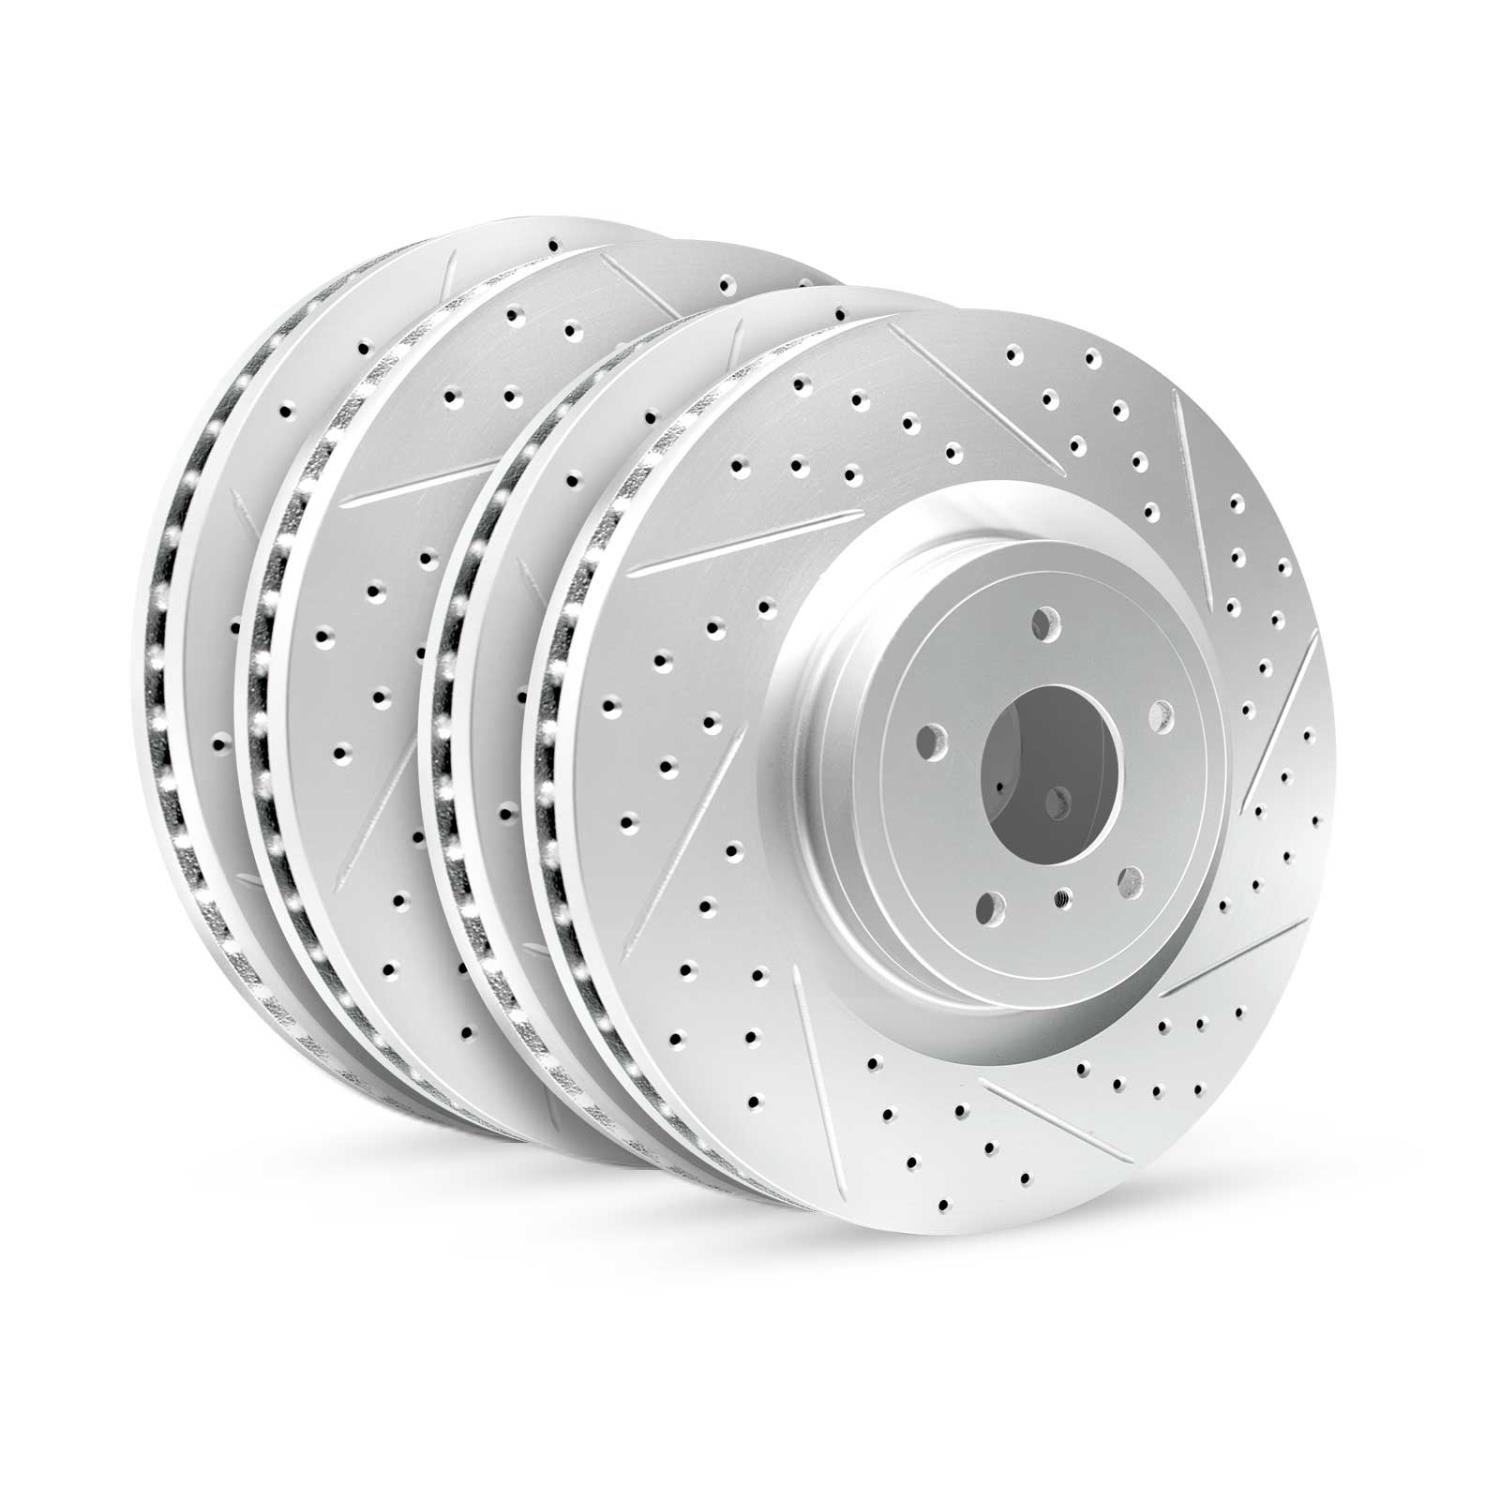 GEO-Carbon Drilled/Slotted Rotors, 2001-2007 Lexus/Toyota/Scion, Position: Front/Rear